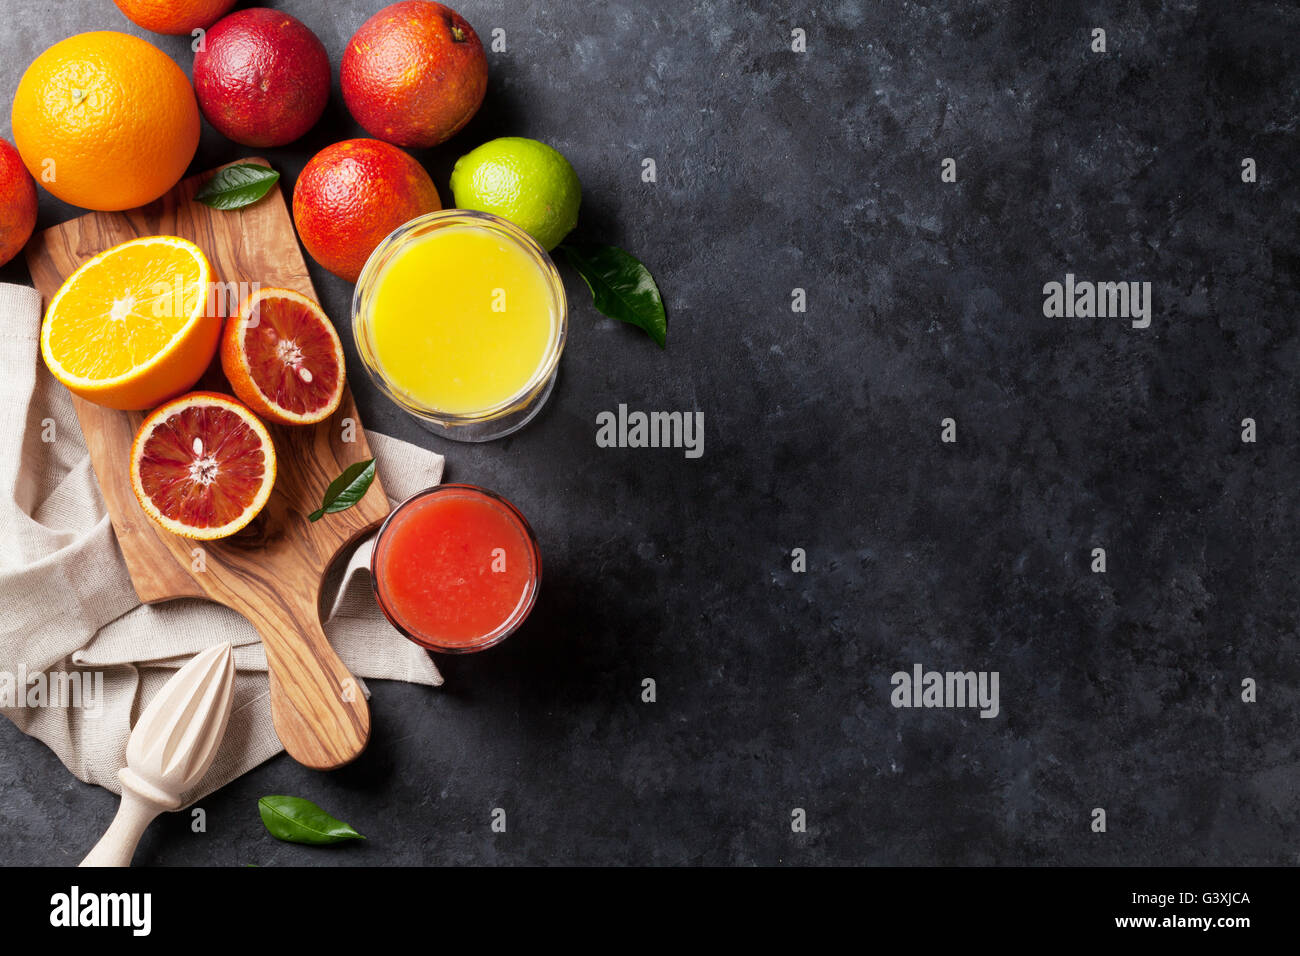 Fresh citruses and juice on dark stone background. Oranges and limes. Top view with copy space Stock Photo